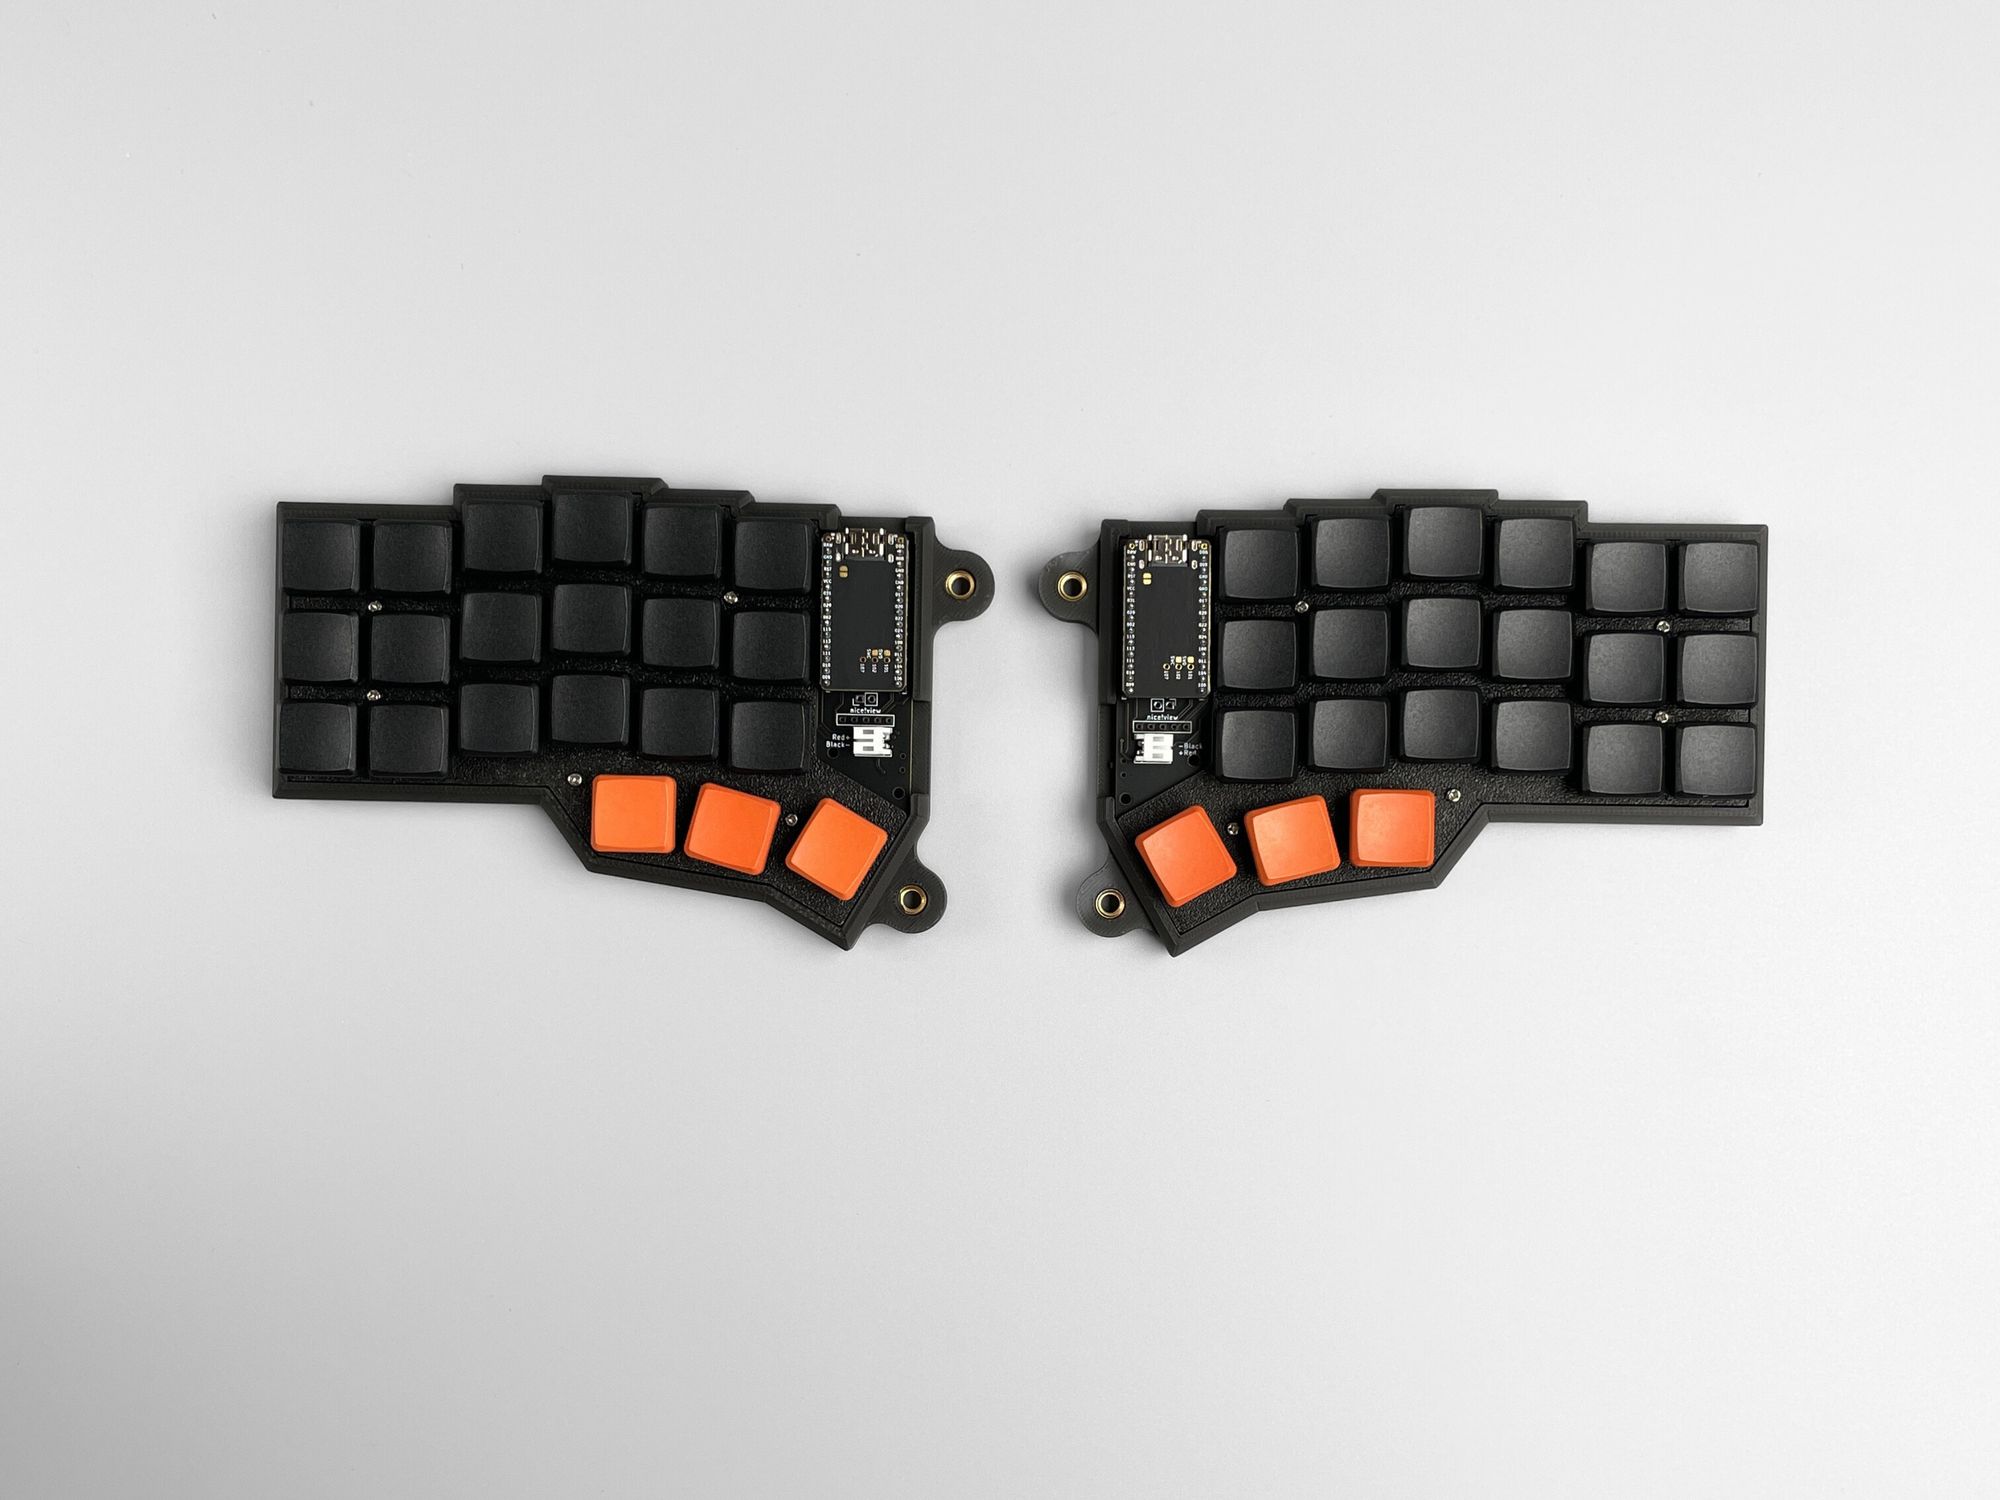 Wireless Corne with Low Profile Choc v1 Key Switches and MBK Keycaps